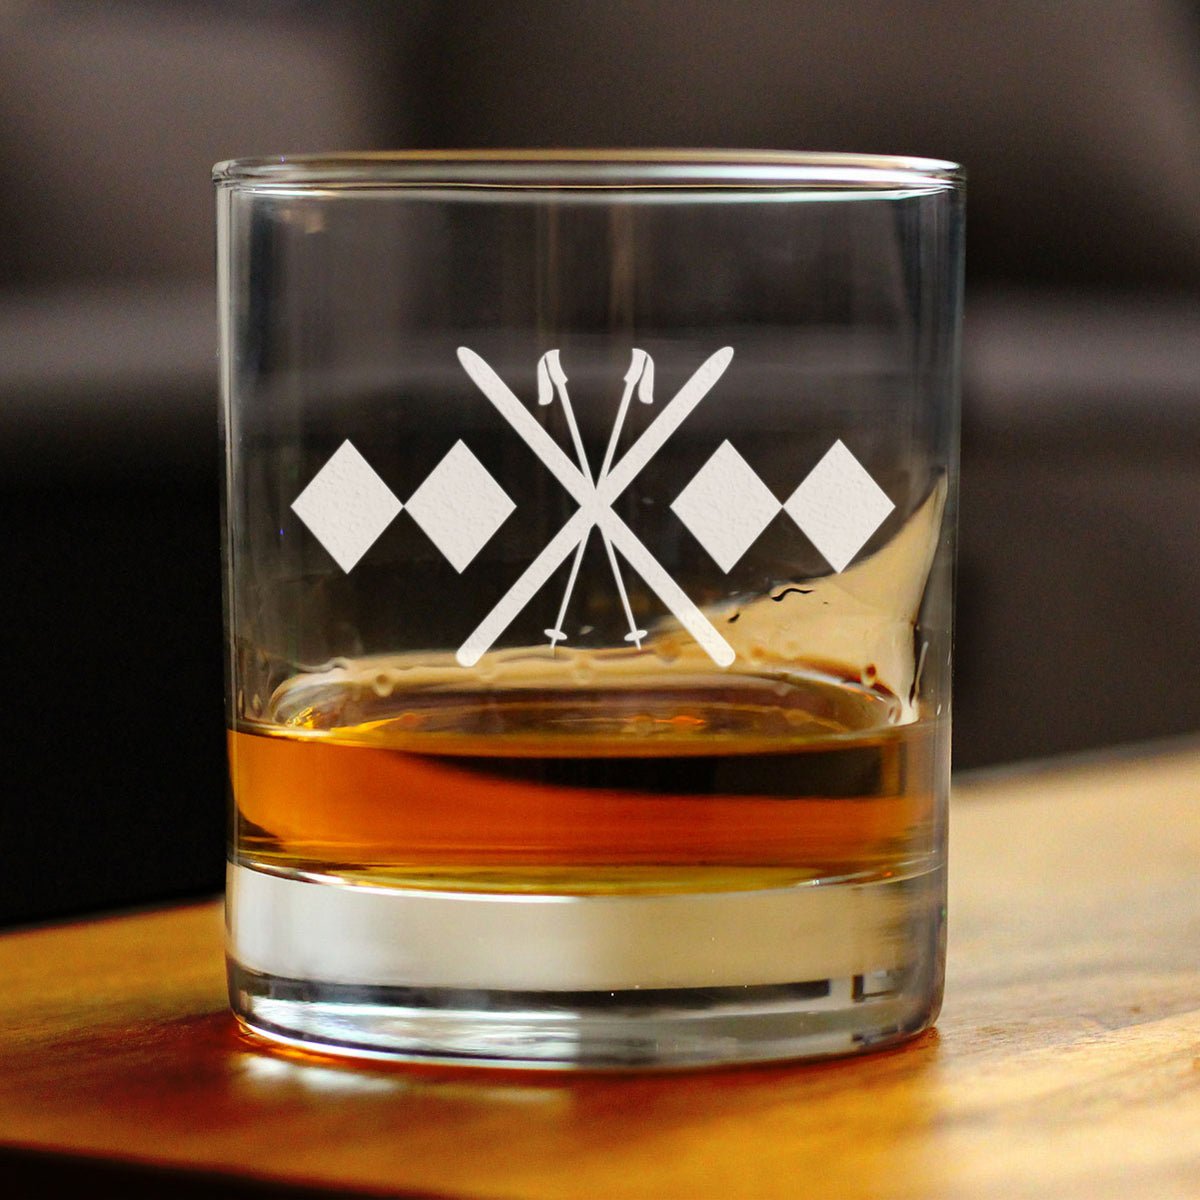 Double Black Diamond - Whiskey Rocks Glass - Unique Skiing Themed Decor and Gifts for Mountain Lovers - 10.25 Oz Glasses